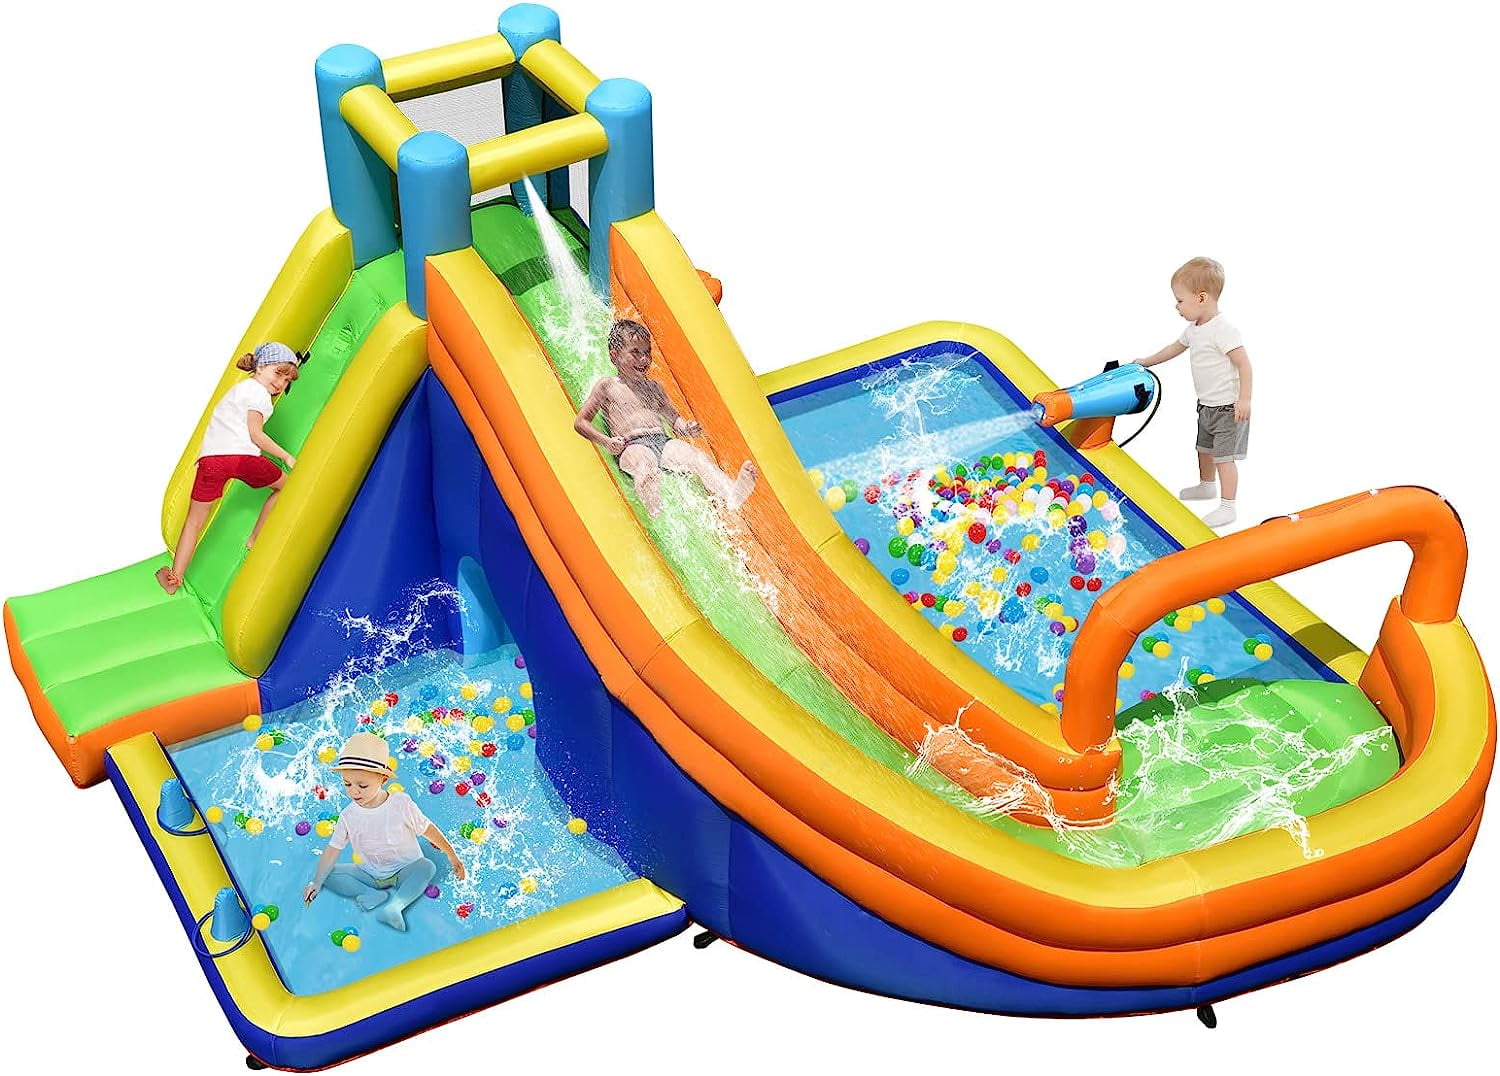 OLAKIDS Inflatable Water Slide, 8 in 1 Bounce House with Slide ...